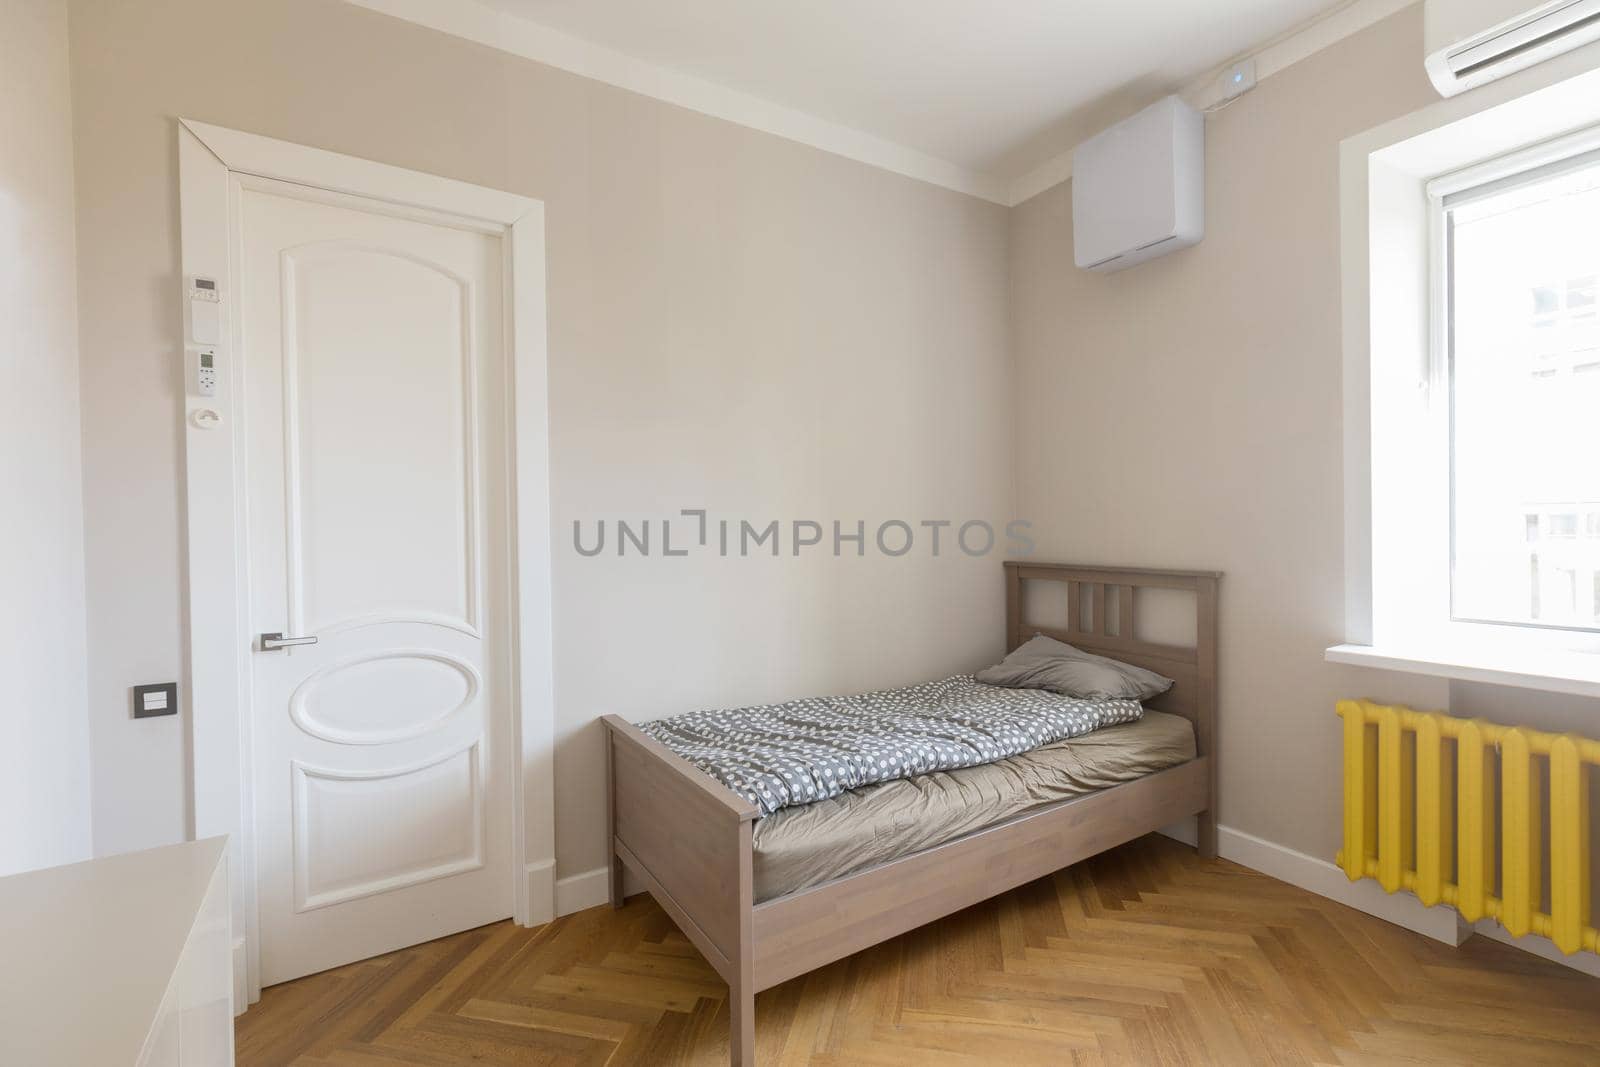 Minimalist style interior design of modern light bedroom with wooden single bed placed in corner between door and window with yellow radiator